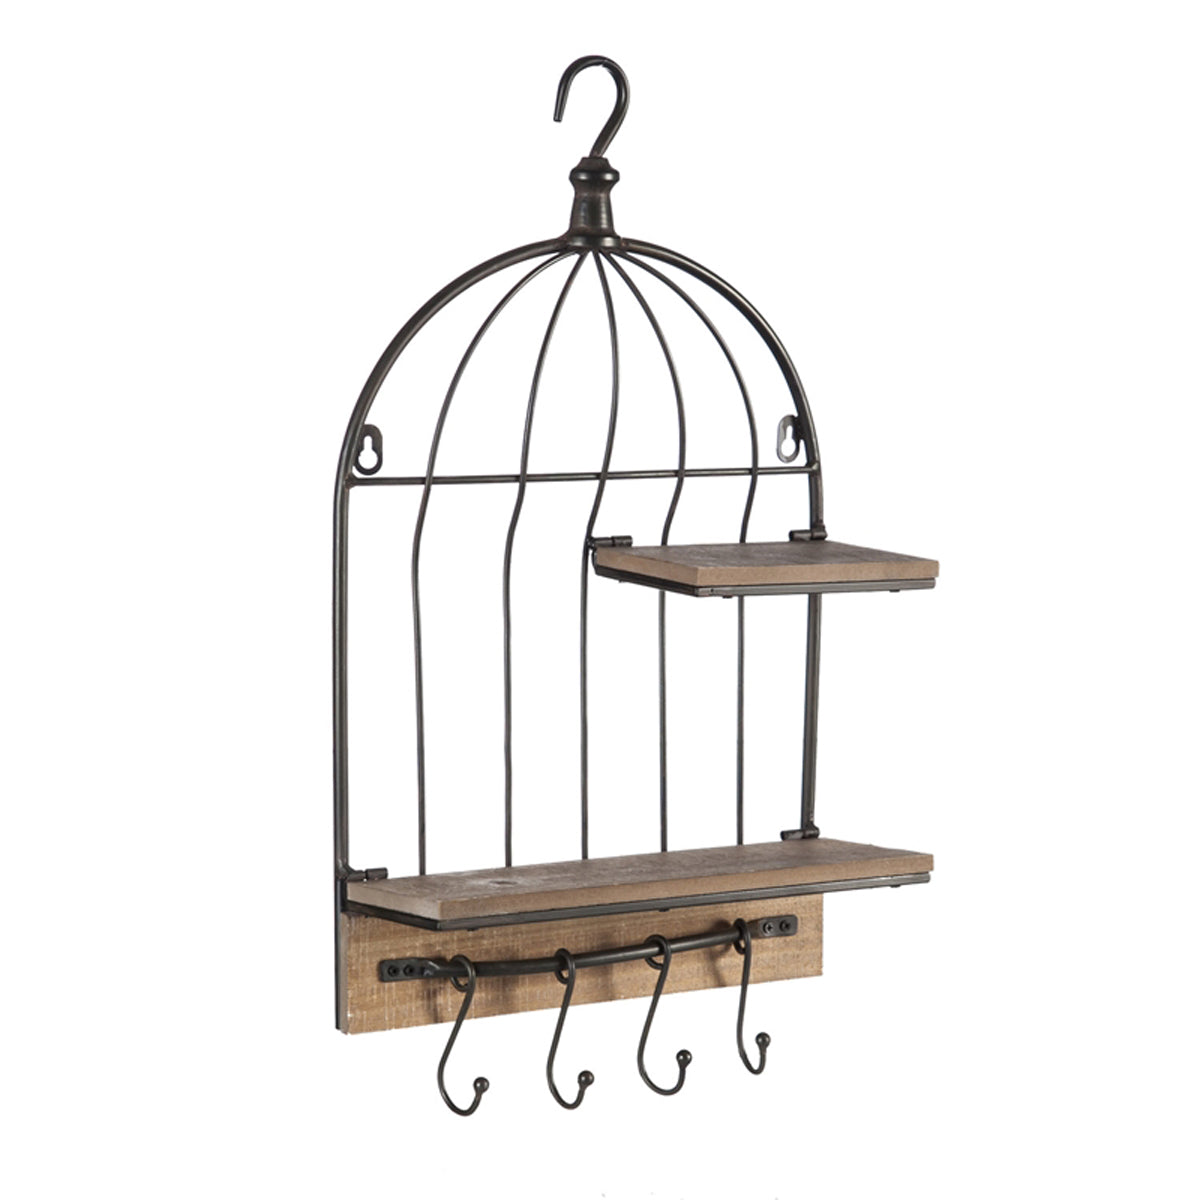 Birdcage Metal Wall Décor with Wood Shelves